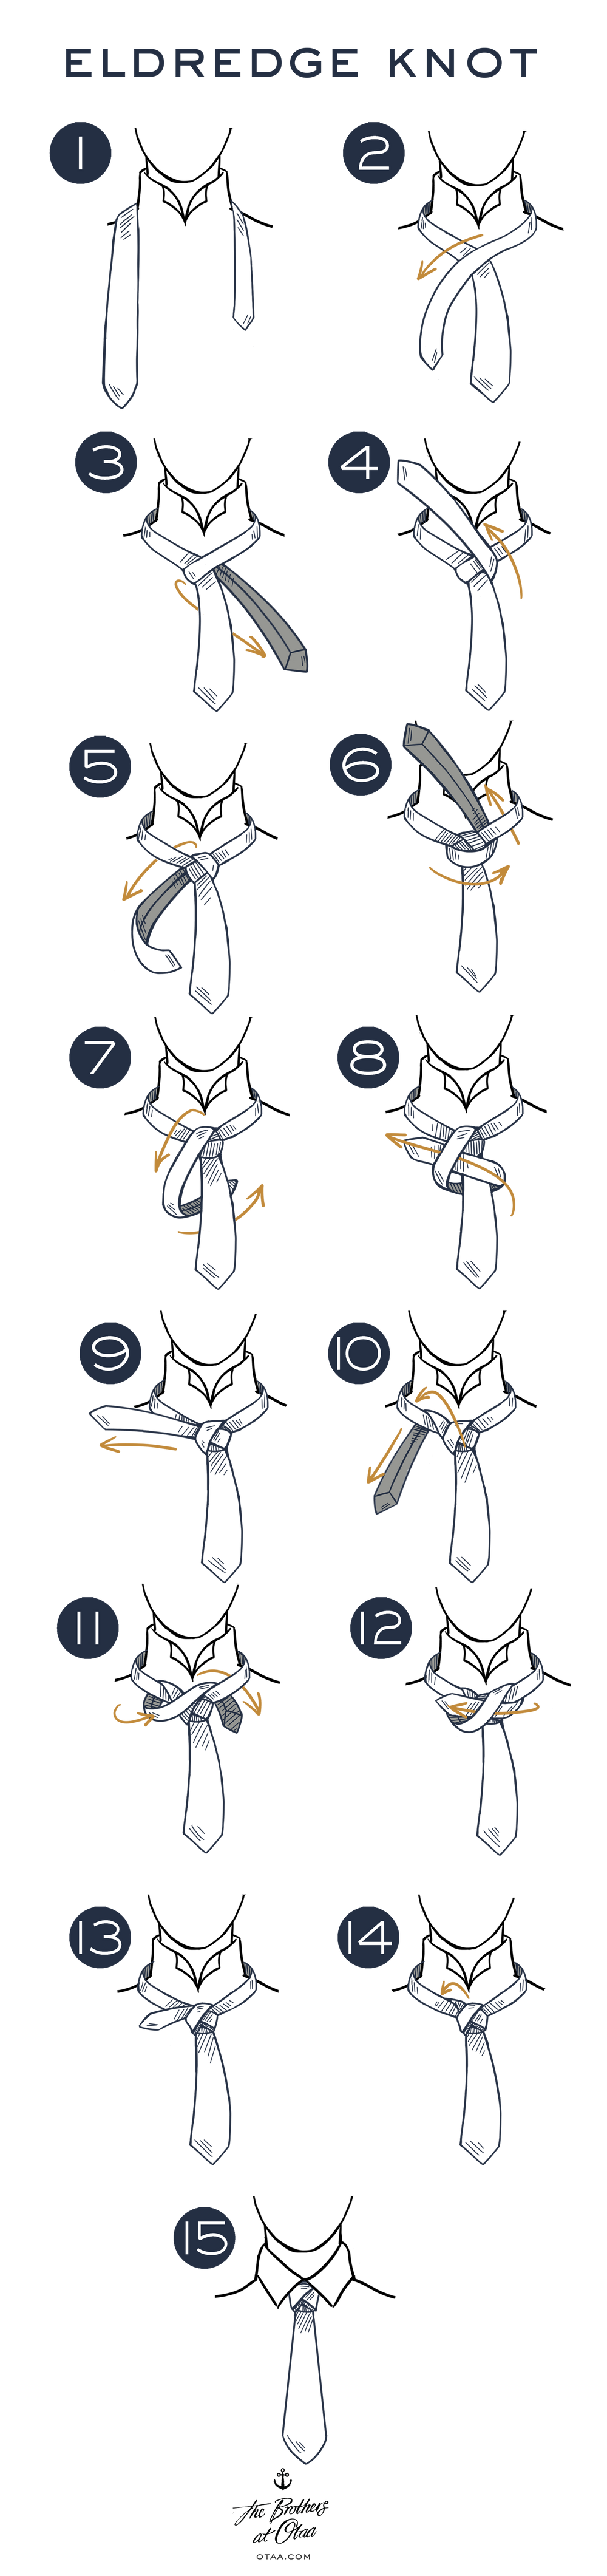 How To Tie An Eldredge Knot - steps